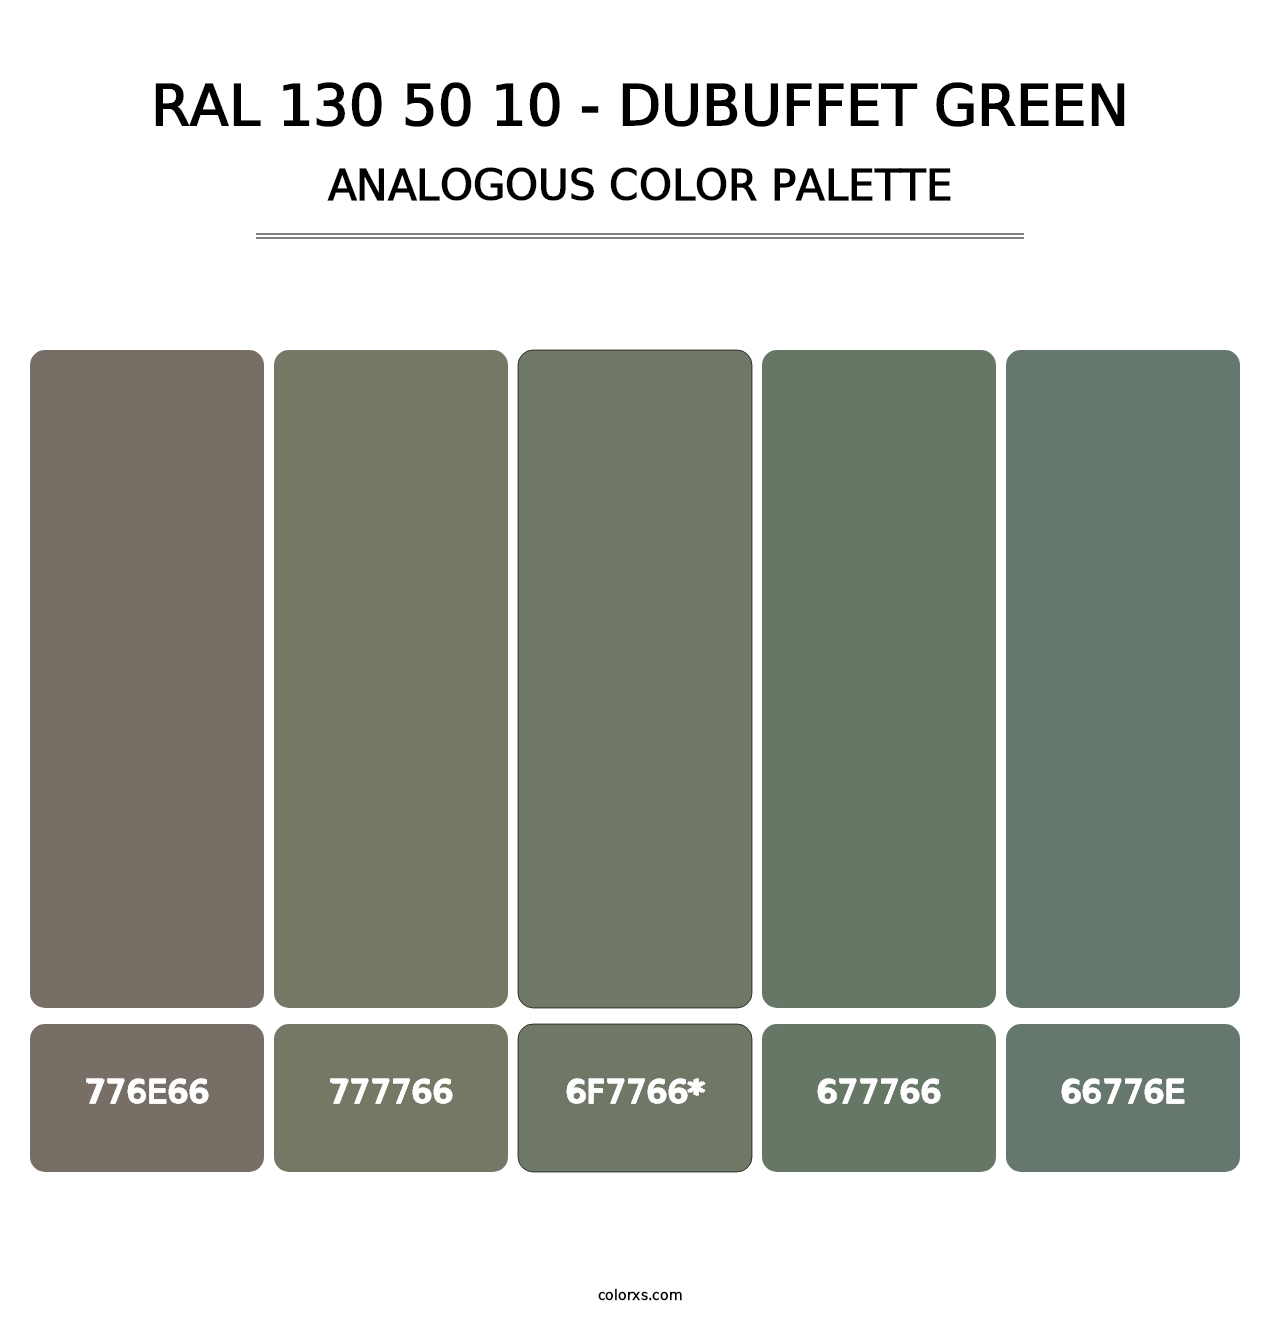 RAL 130 50 10 - Dubuffet Green - Analogous Color Palette